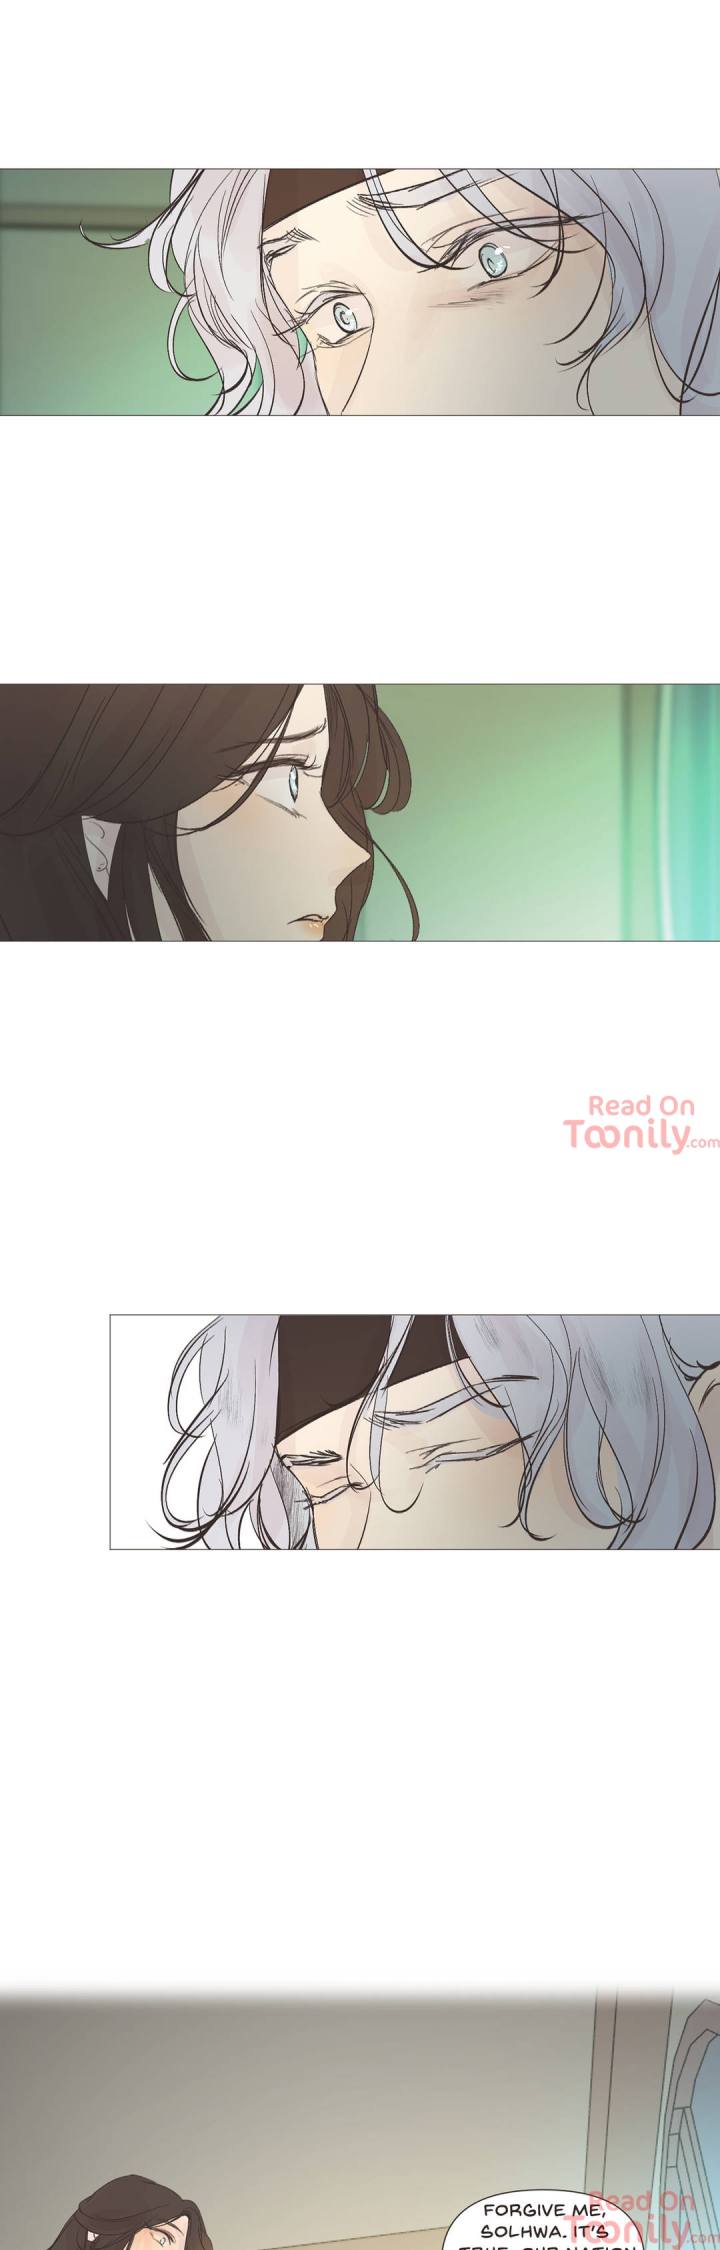 Ellin's Solhwa - Chapter 19 Page 5